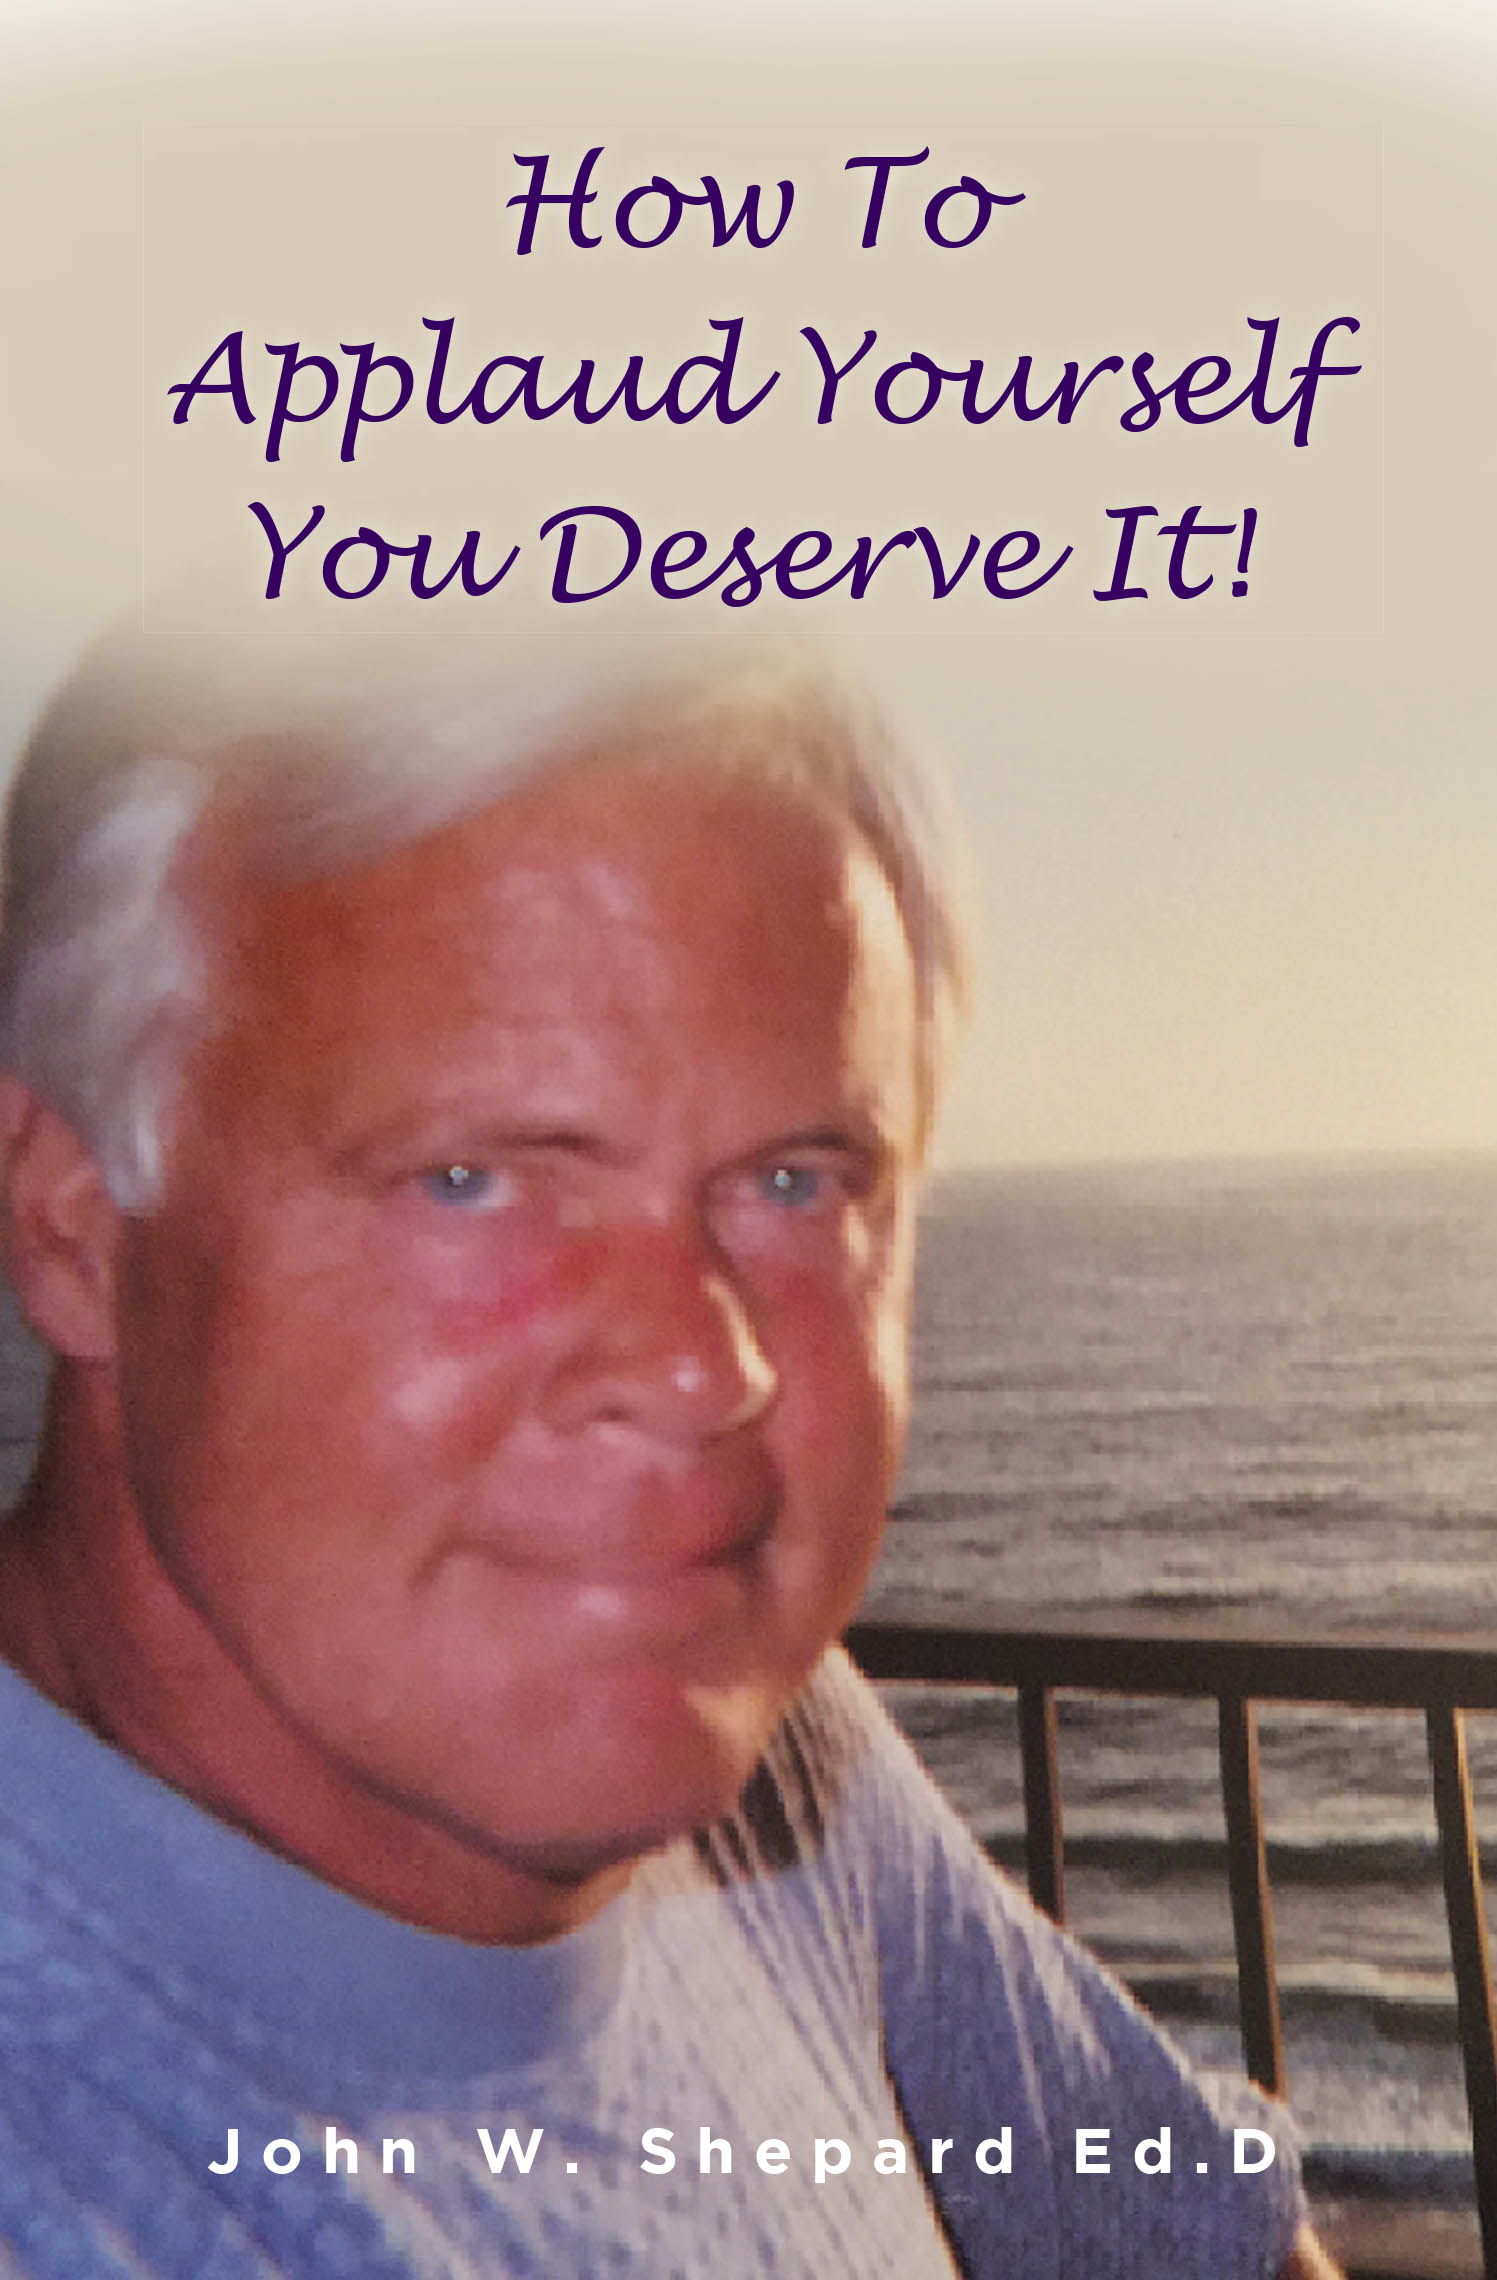 John W. Shepard Ed. D’s New Book, “How to Applaud Yourself You Deserve It!” is a Profound & Eye-Opening Work Aimed at Helping Readers Discover Their True Self-Worth